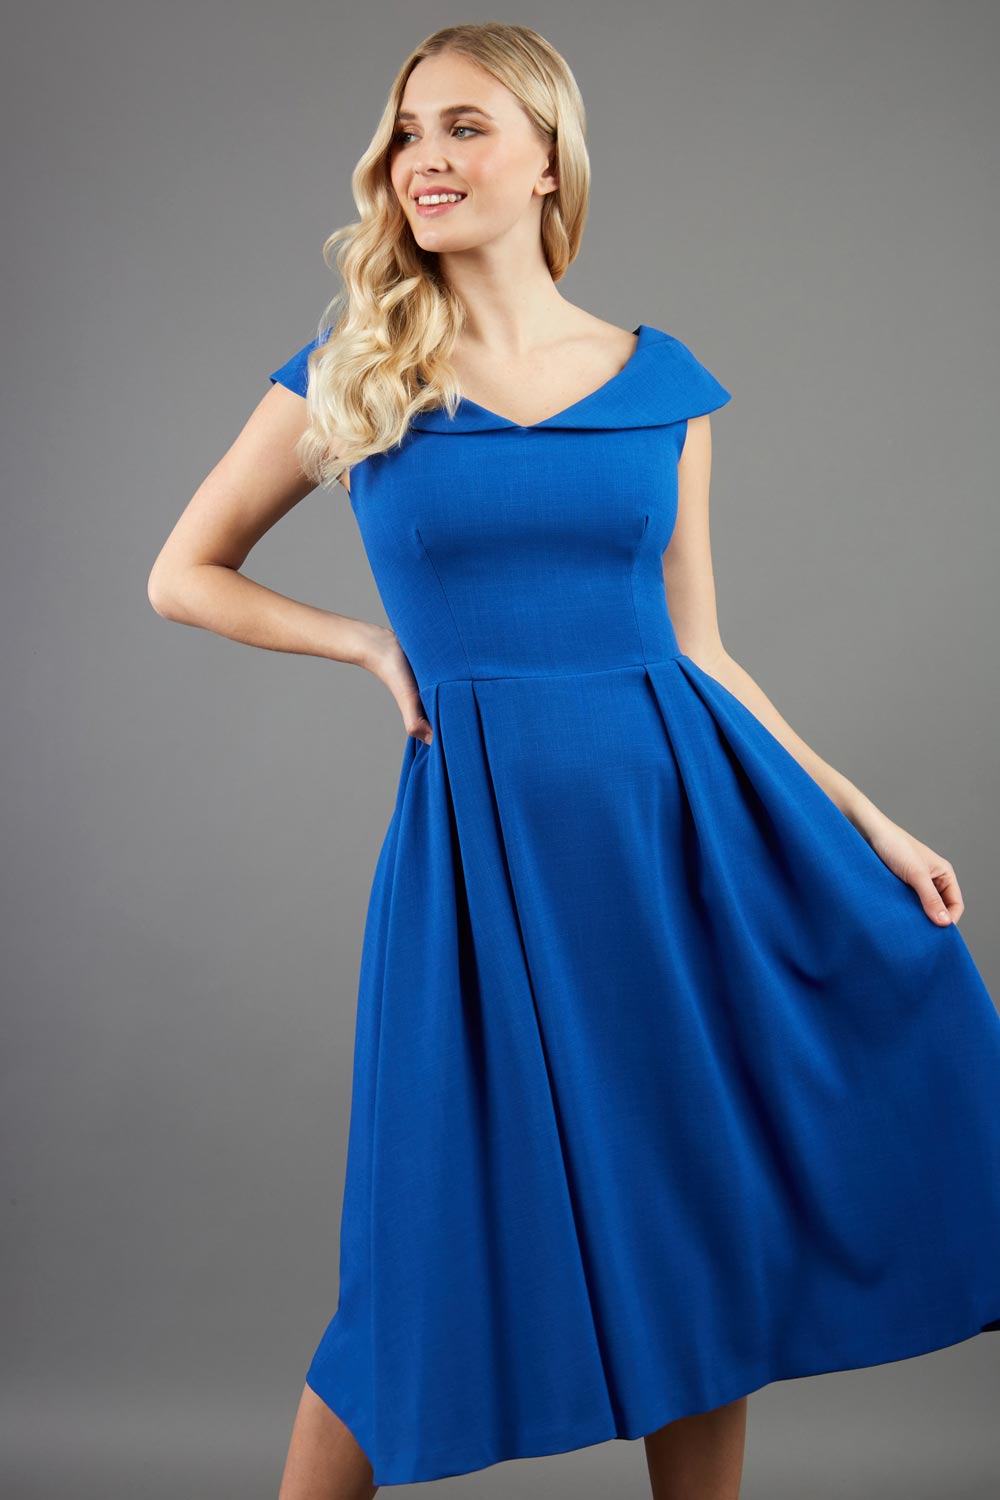 model is wearing divacatwalk Chesterton Sleeveless a-line swing dress in cobalt royal blue with oversized collar front